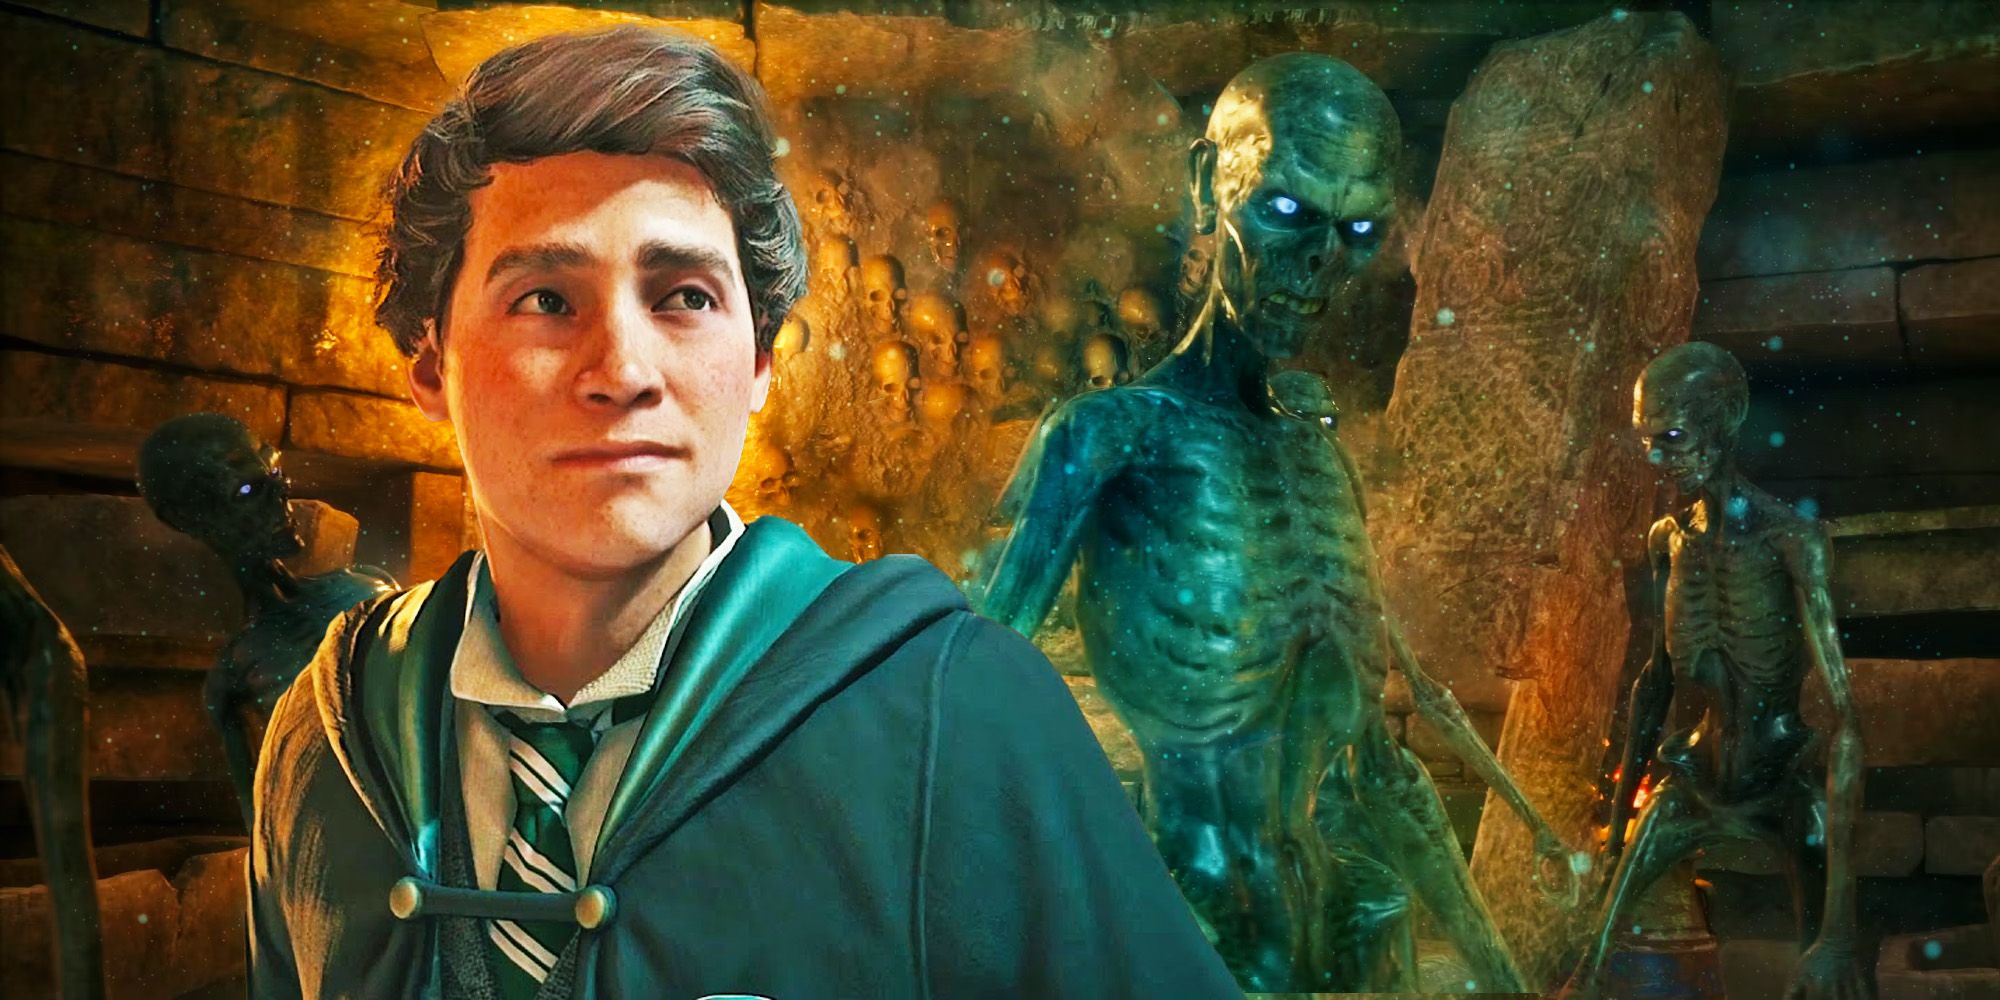 Sebastian Sallow from Hogwarts Legacy wears his green Slytherin robes. Behind him is a group of Inferi, which look like reanimated skeletons with glowing blue eyes, standing in what appears to be a crypt.